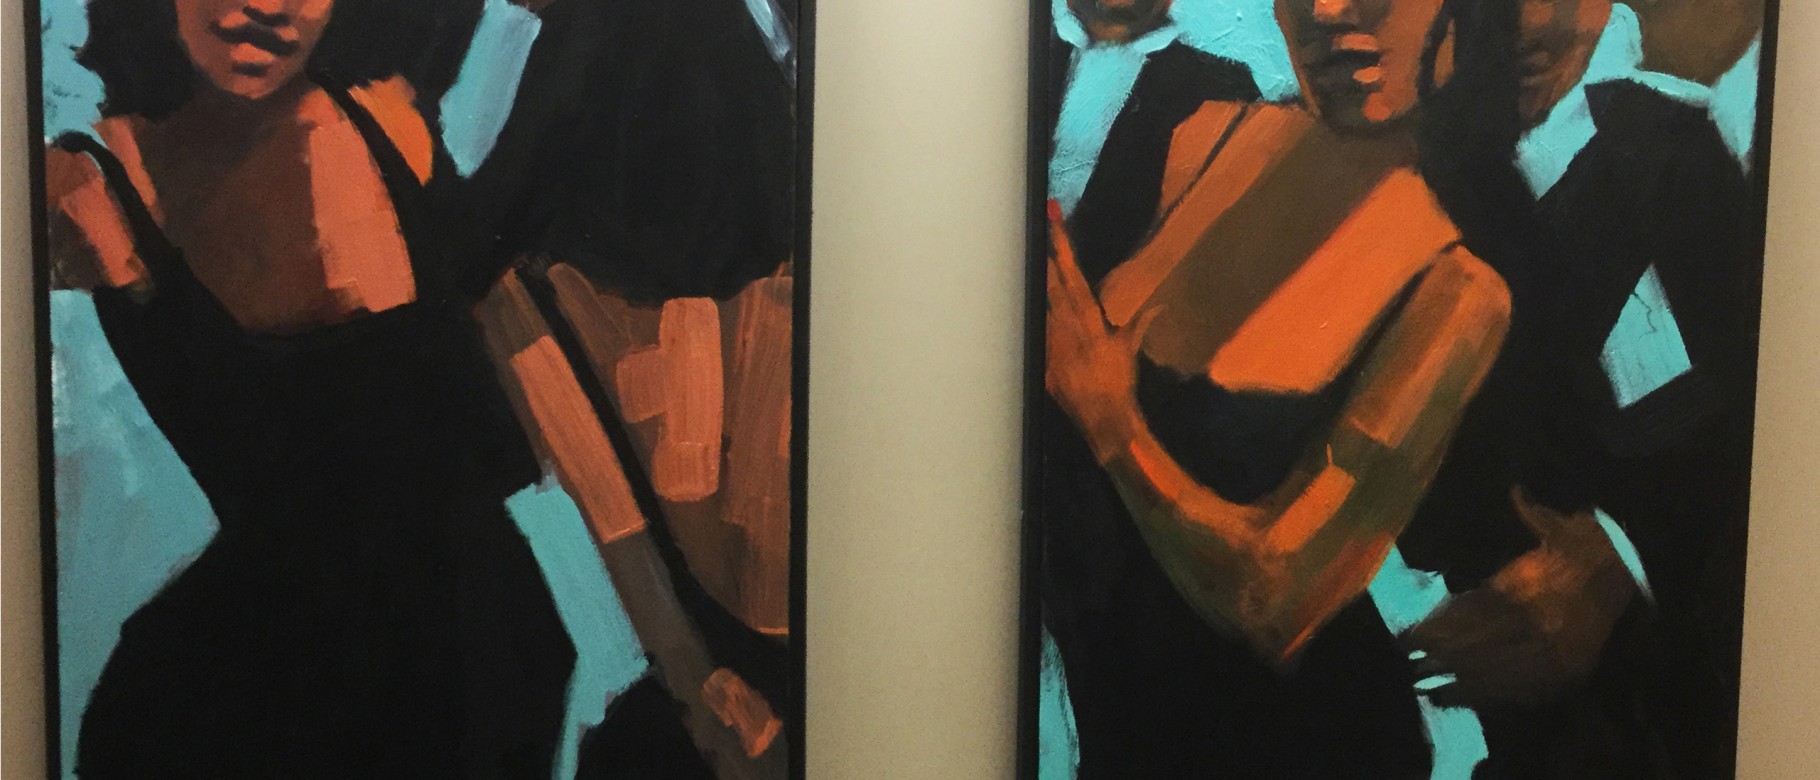 Diptych painted by contemporary artist Robert Freeman, on display on the first floor of the College of Pharmacy